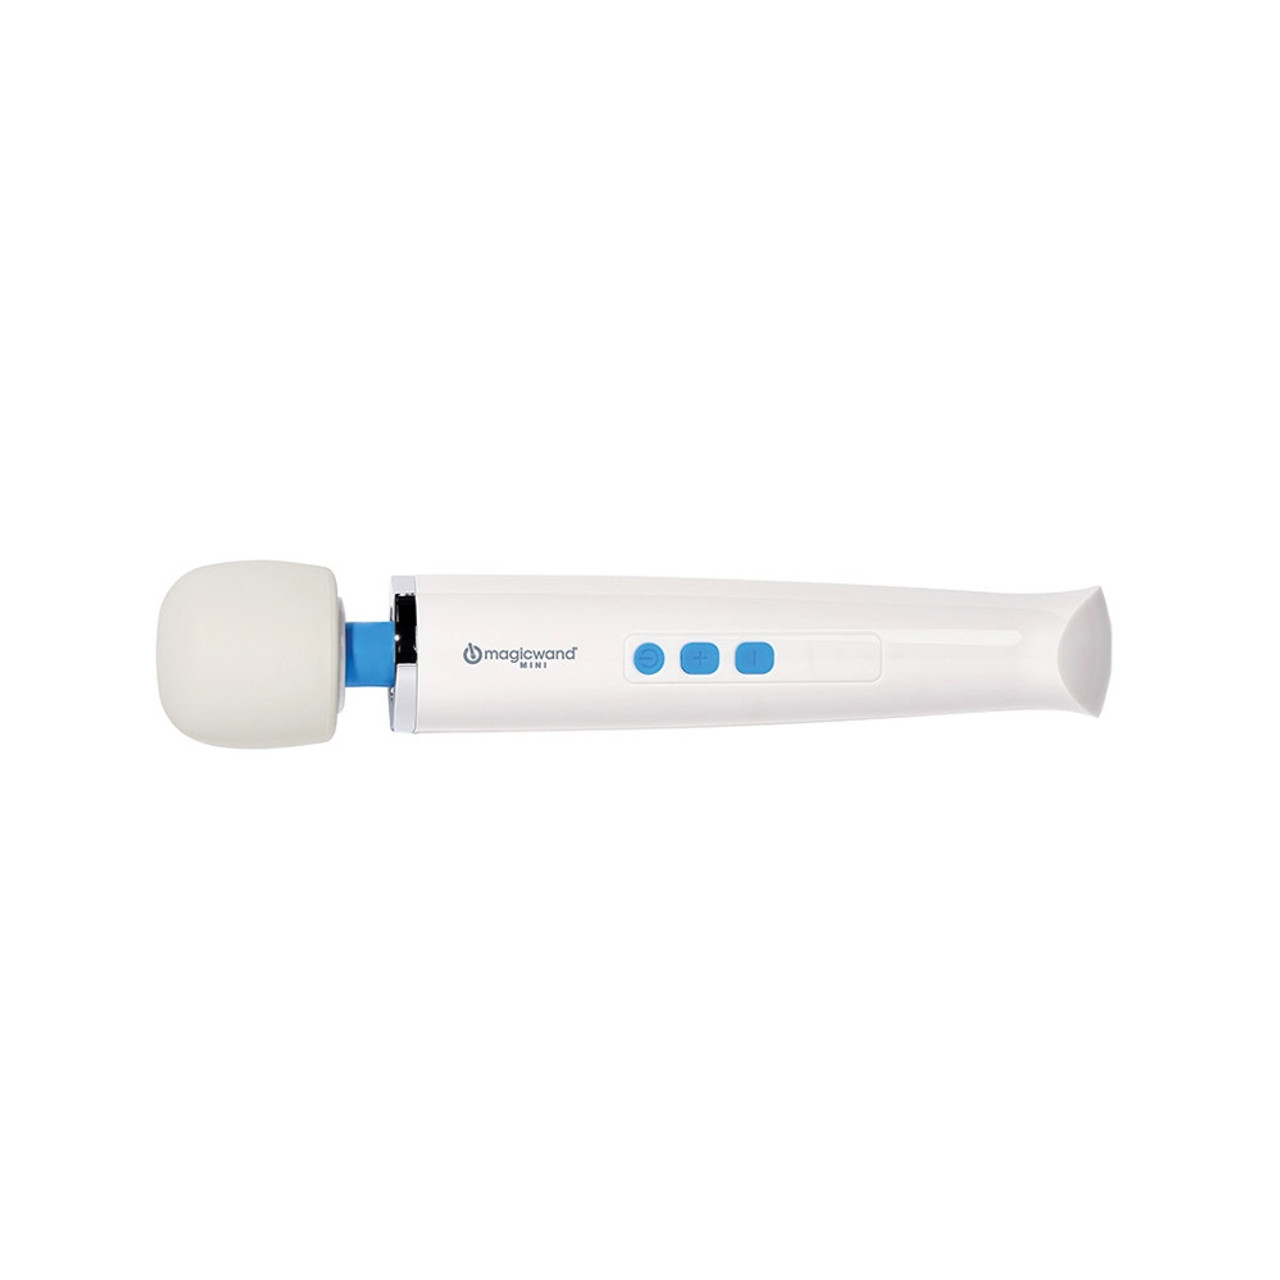 https://cdn11.bigcommerce.com/s-rph88/images/stencil/1280x1280/products/25056/240588/magic-wand-mini-unplugged-multispeed-rechargeable-wand-massager-2__15166.1647632335.jpg?c=2